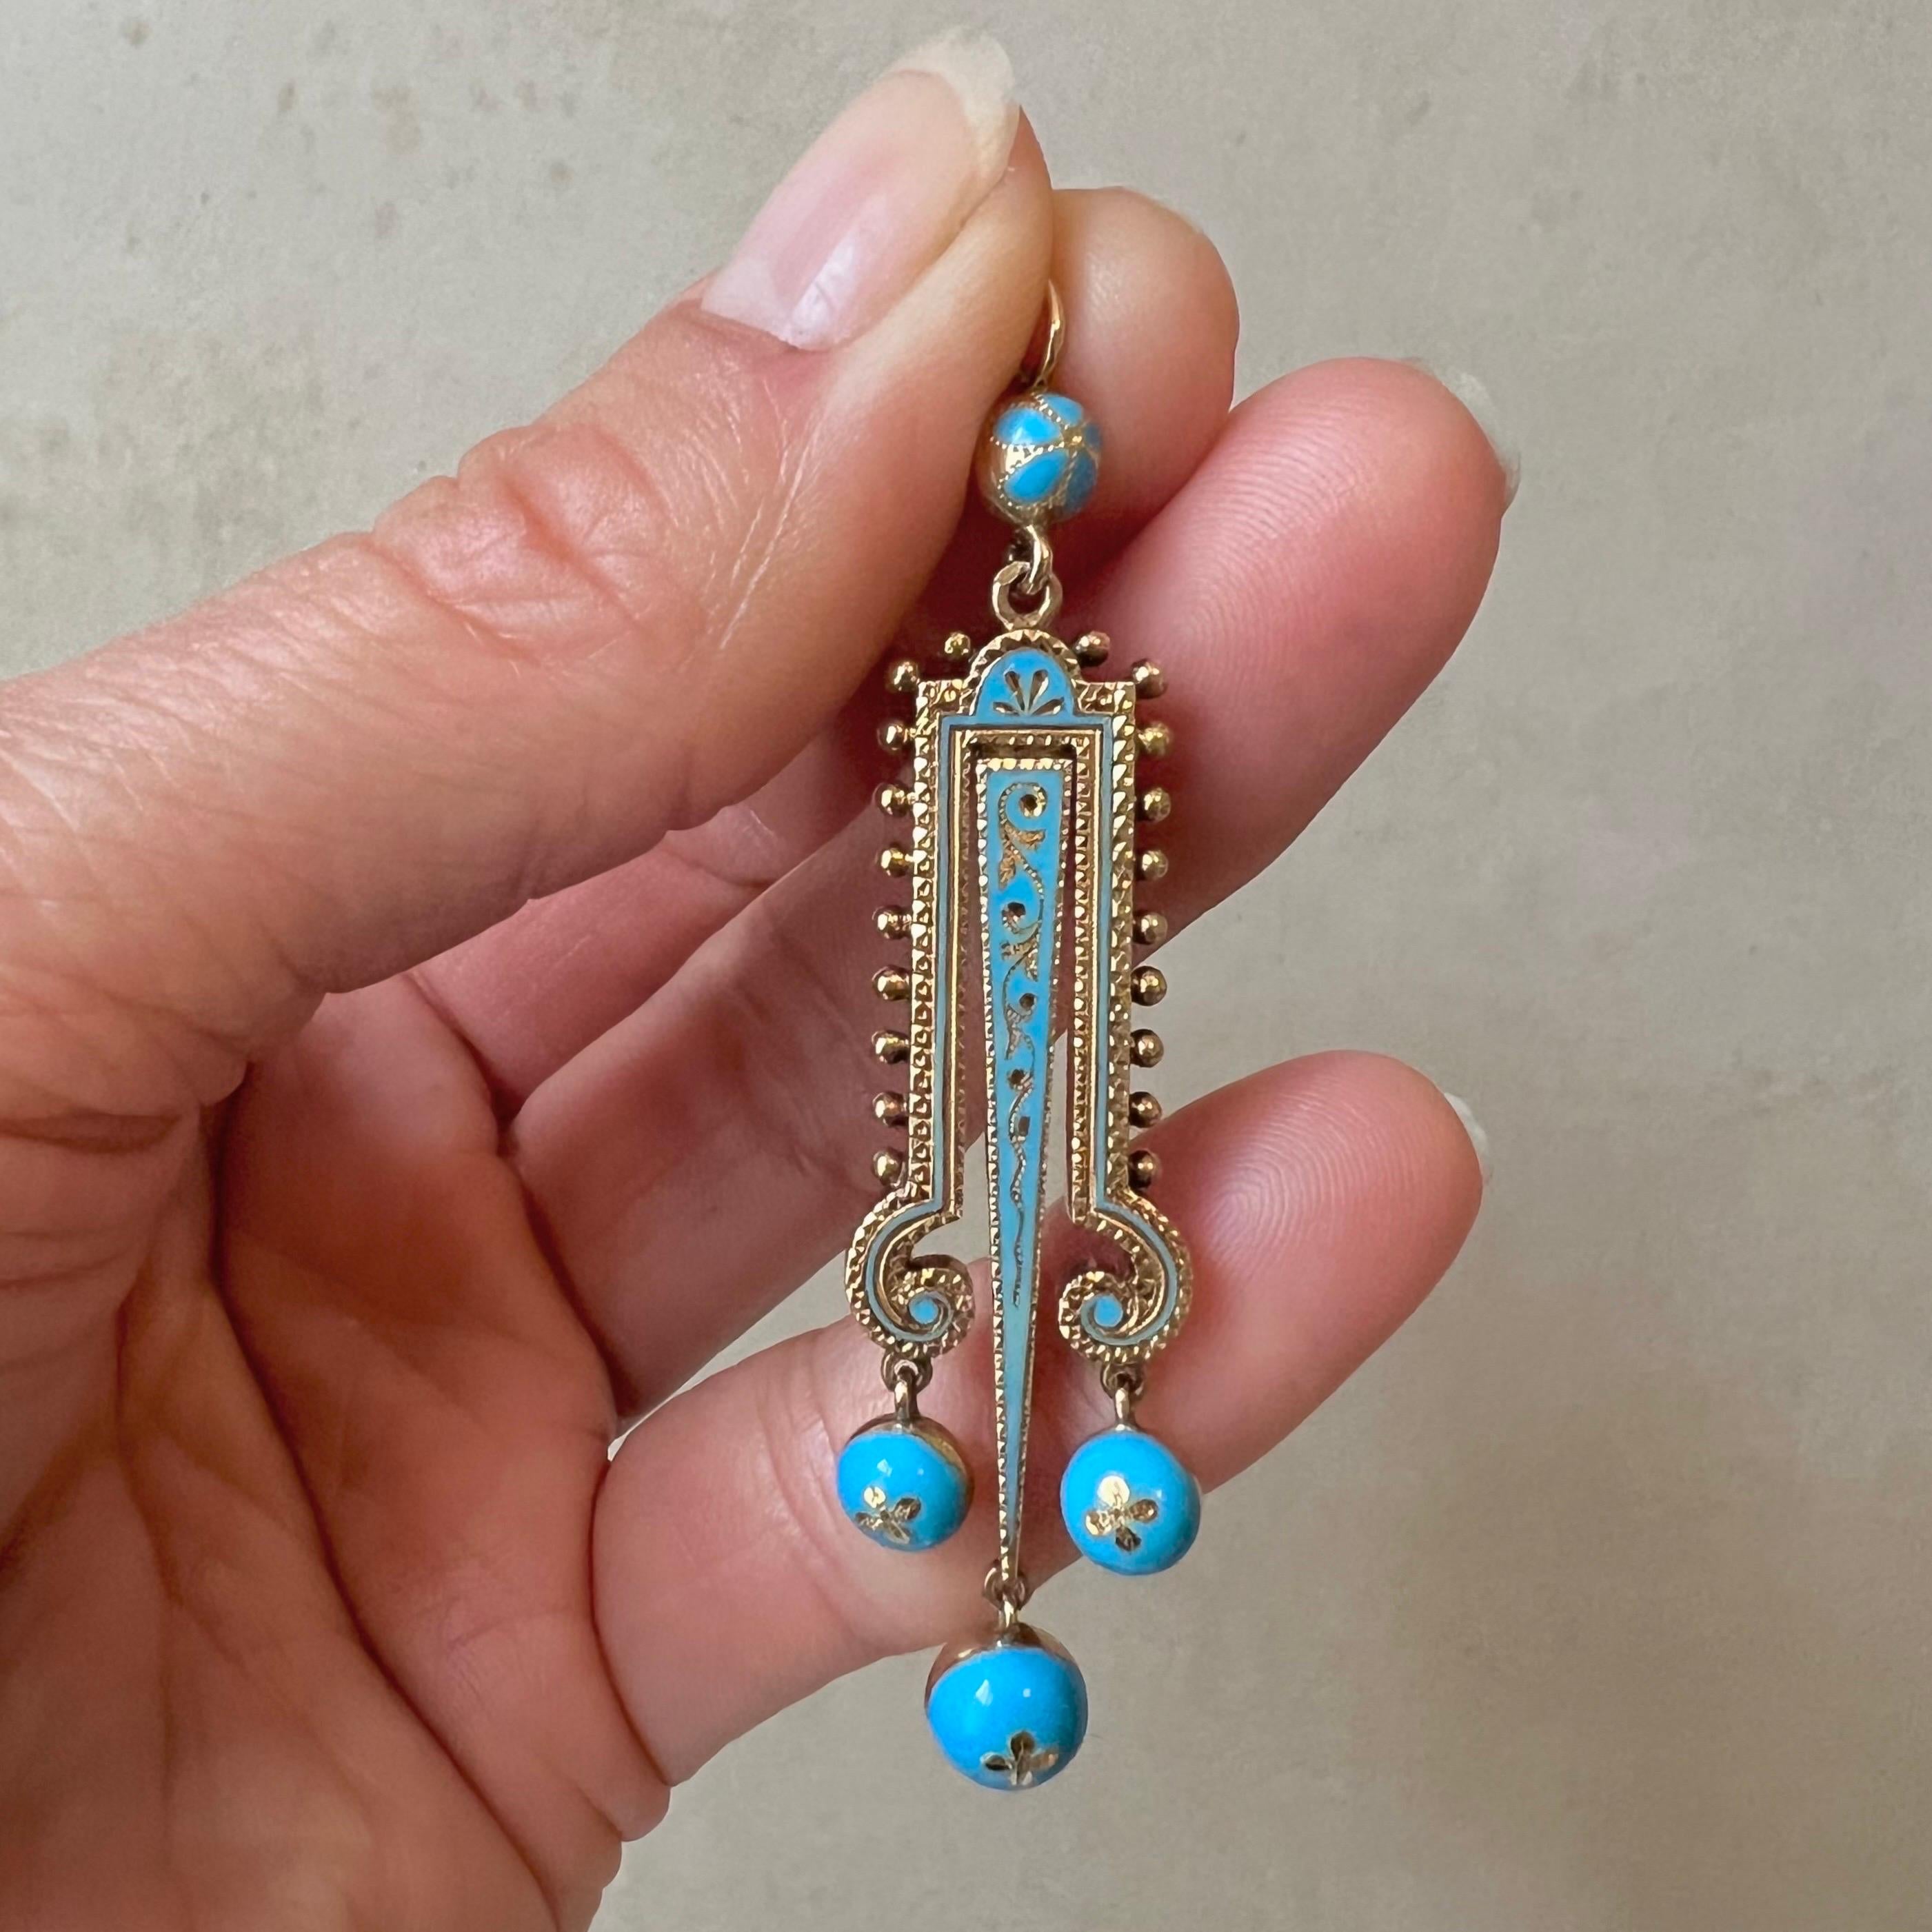 Step into the elegance of the past with this antique Victorian 14 karat gold and turquoise enameled pendant. The pendant is beautifully set with a vertical row of small gold balls on both sides while the design on the front alternates with turquoise